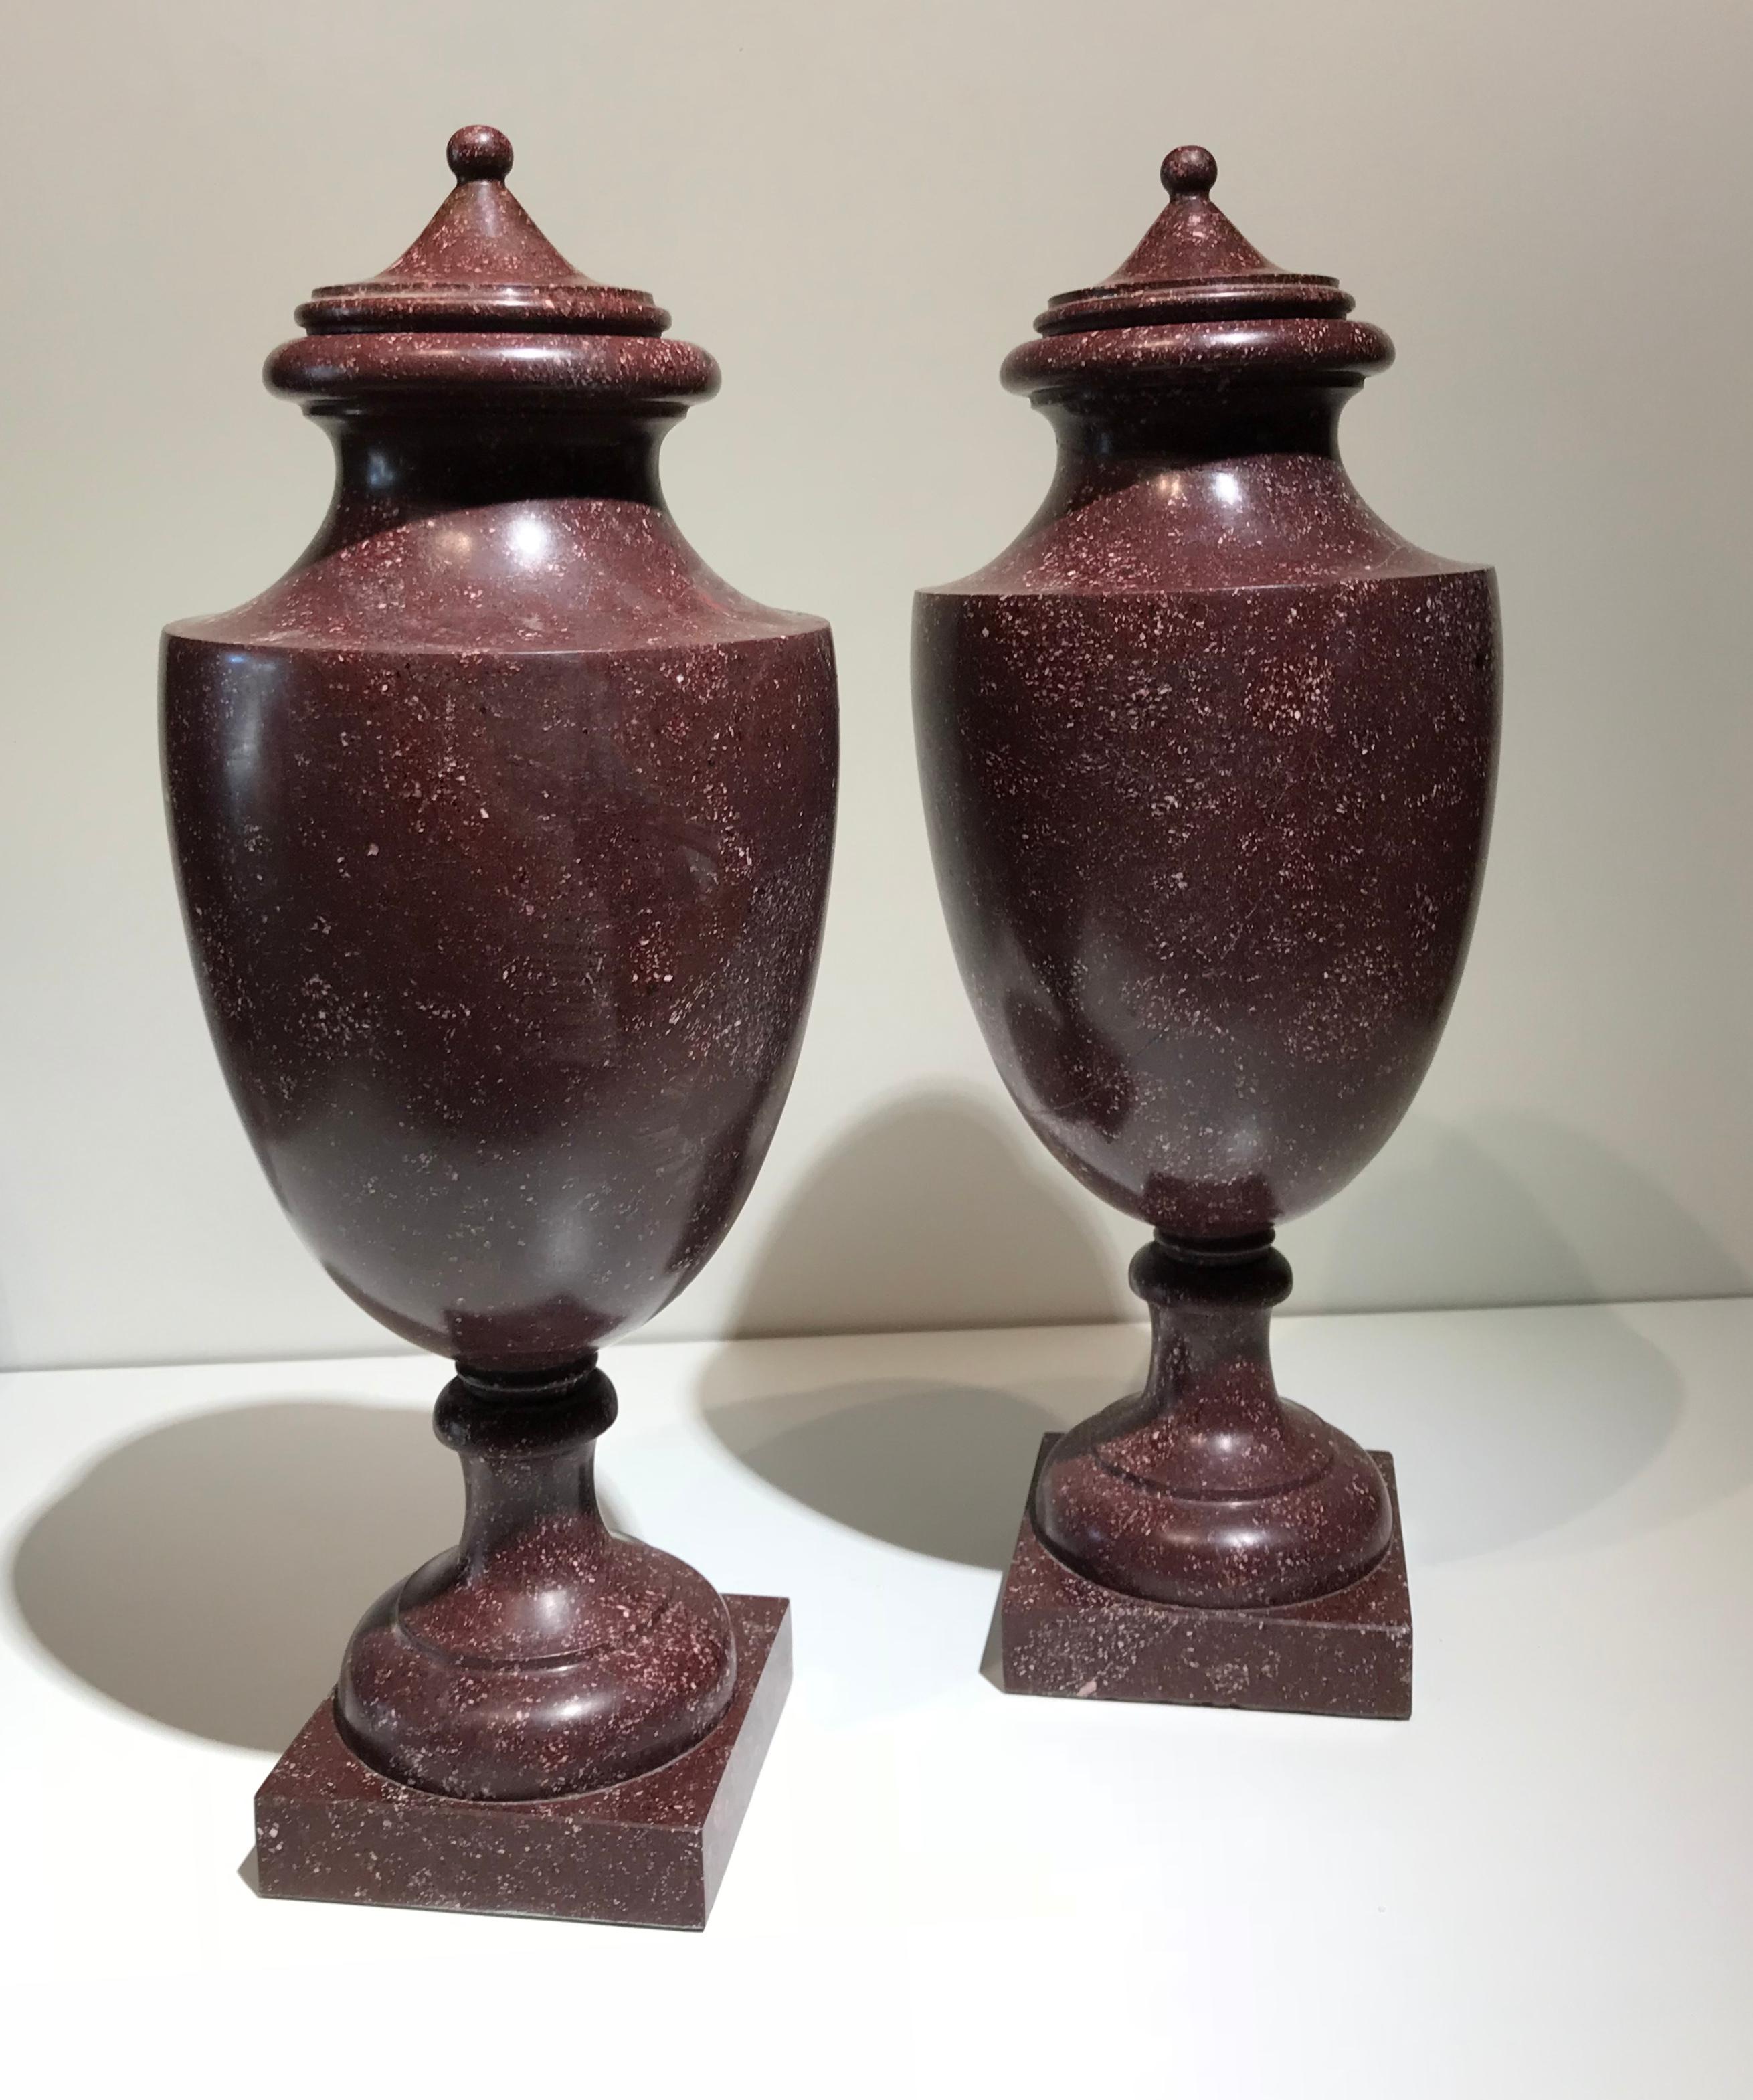 20th Century Italian Neoclassical Style Pair of Urns Made with Ancient Red Porphyry